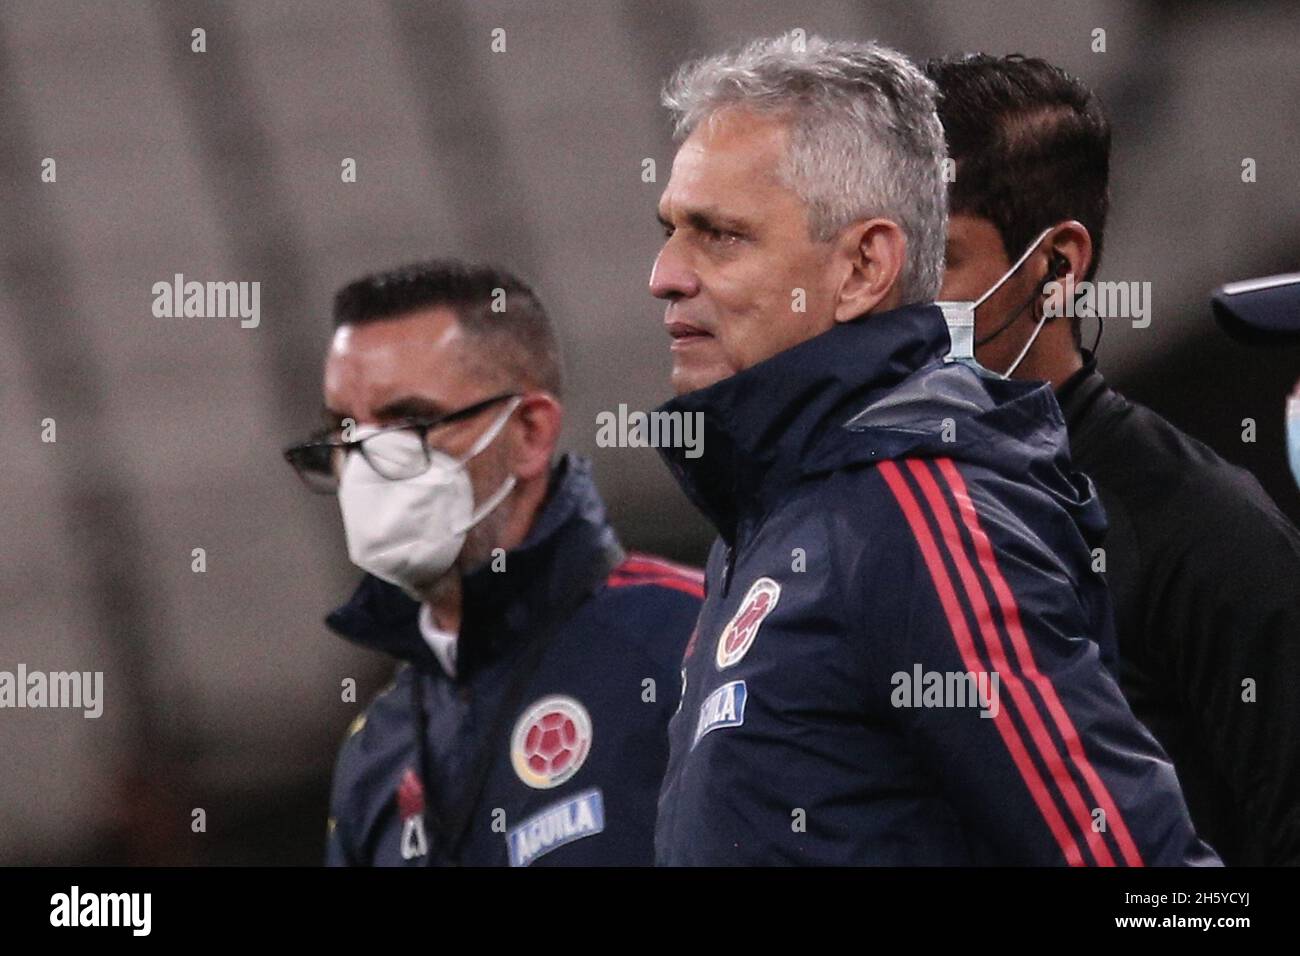 Sao Paulo, Brazil. 12th Nov, 2021. SP - Sao Paulo - 11/11/2021 - WORLD CUP 2022 PLAYOFFS, BRAZIL X COLOMBIA - Reinaldo Rueda Colombia coach during match against Brazil at Arena Corinthians stadium for World Cup 2022 qualifiers. Photo: Ettore Chiereguini/AGIF/Sipa USA Credit: Sipa USA/Alamy Live News Credit: Sipa USA/Alamy Live News Stock Photo